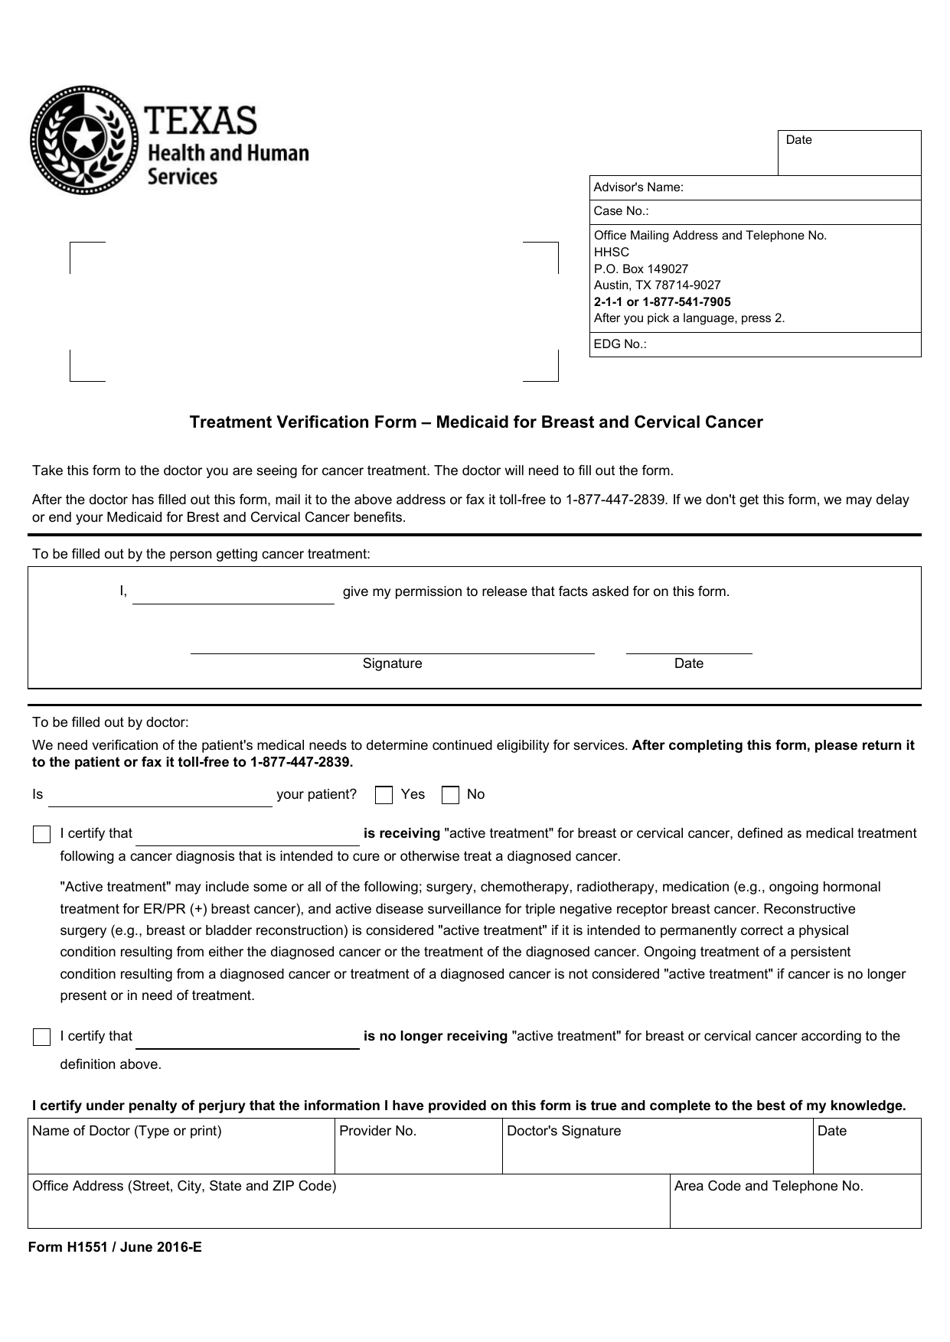 Form H1551 Treatment Verification Form - Medicaid for Breast and Cervical Cancer - Texas, Page 1